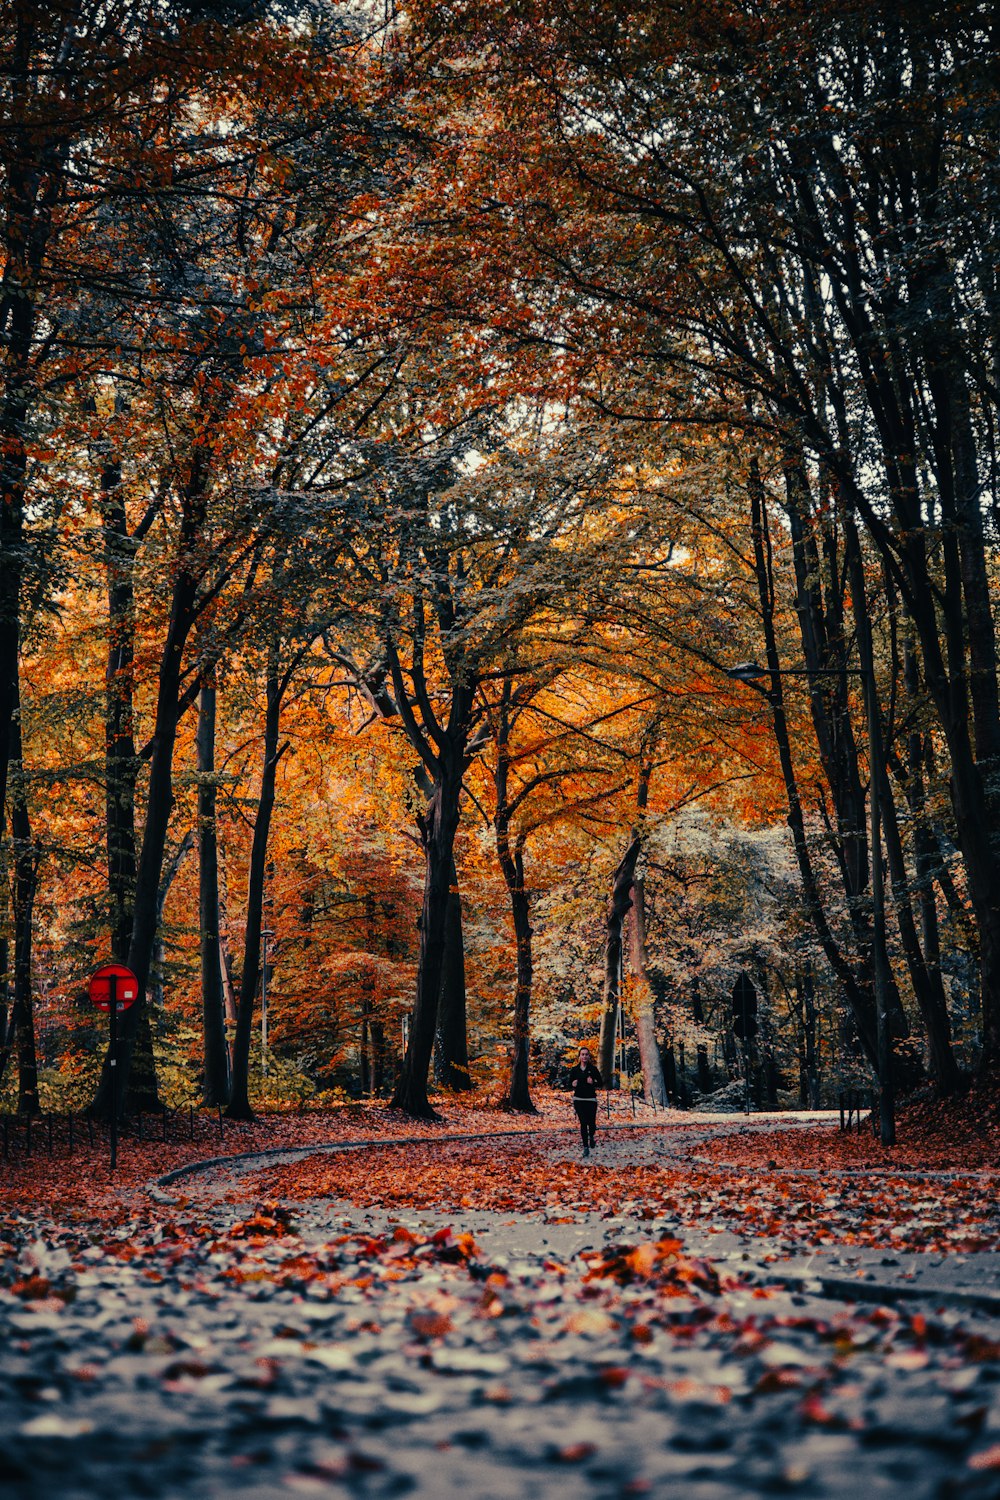 a person walking in a park with trees with orange leaves